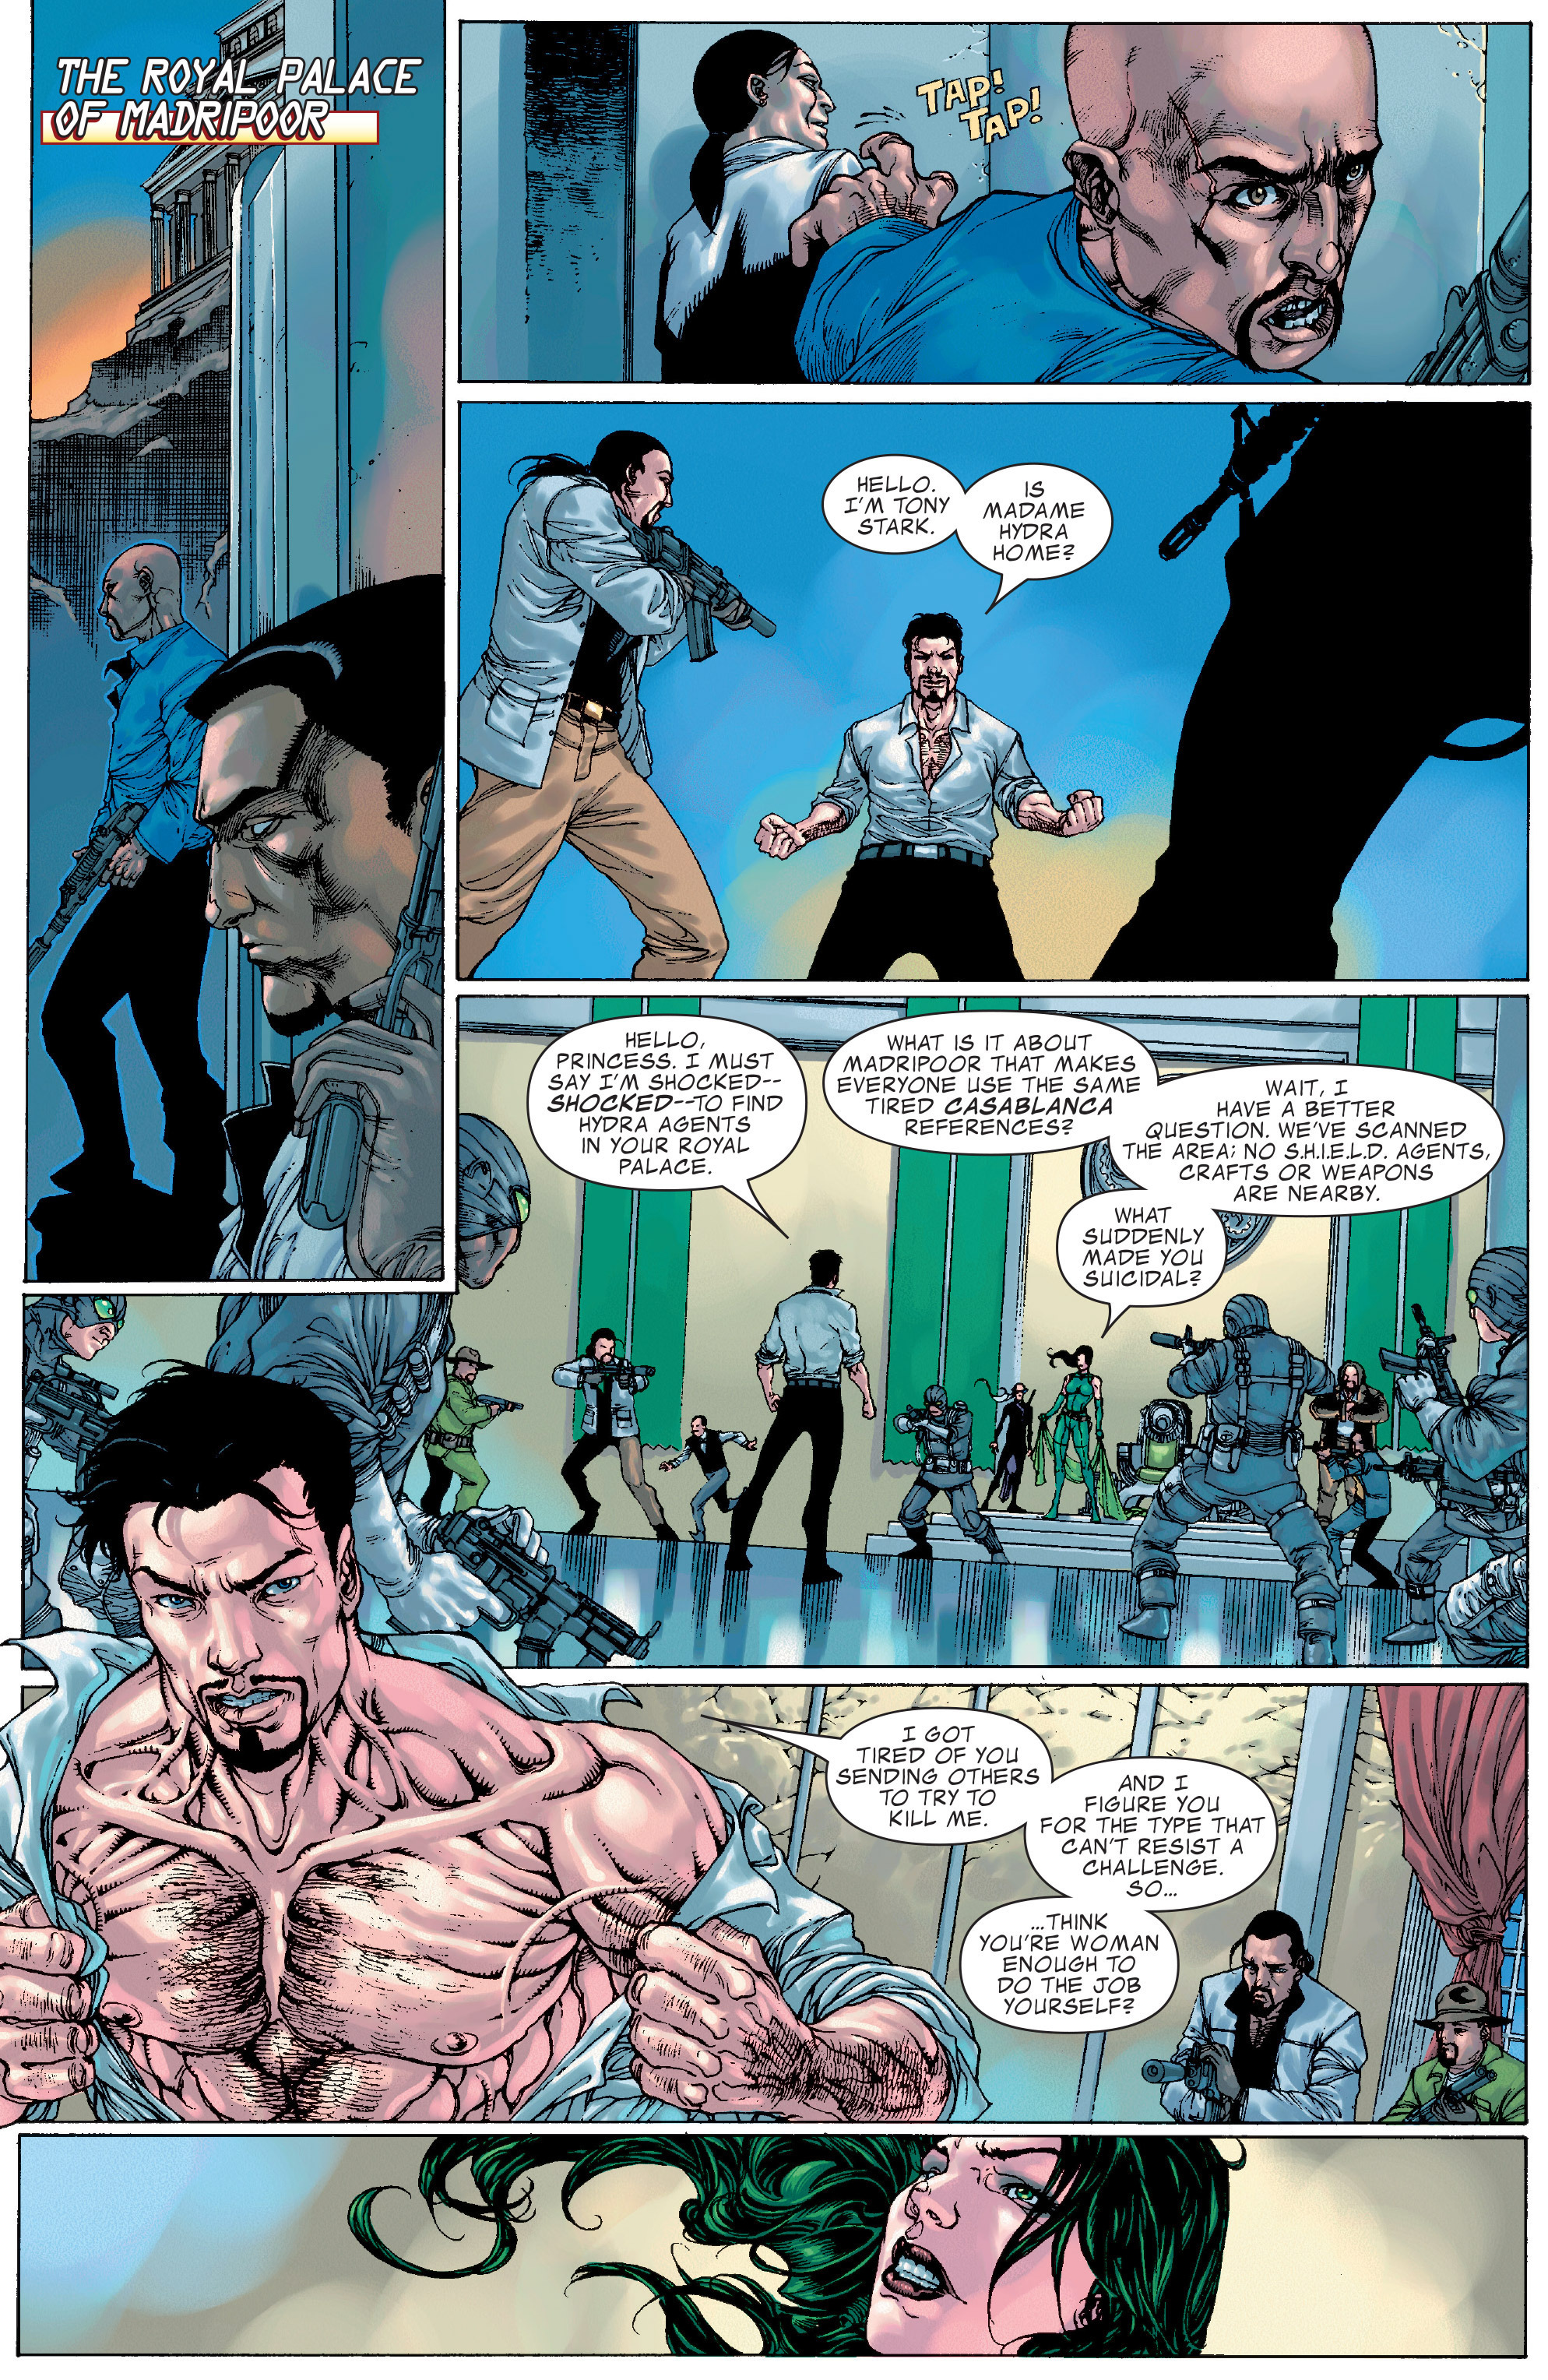 Iron Man: Director of S.H.I.E.L.D. Annual Full Page 28